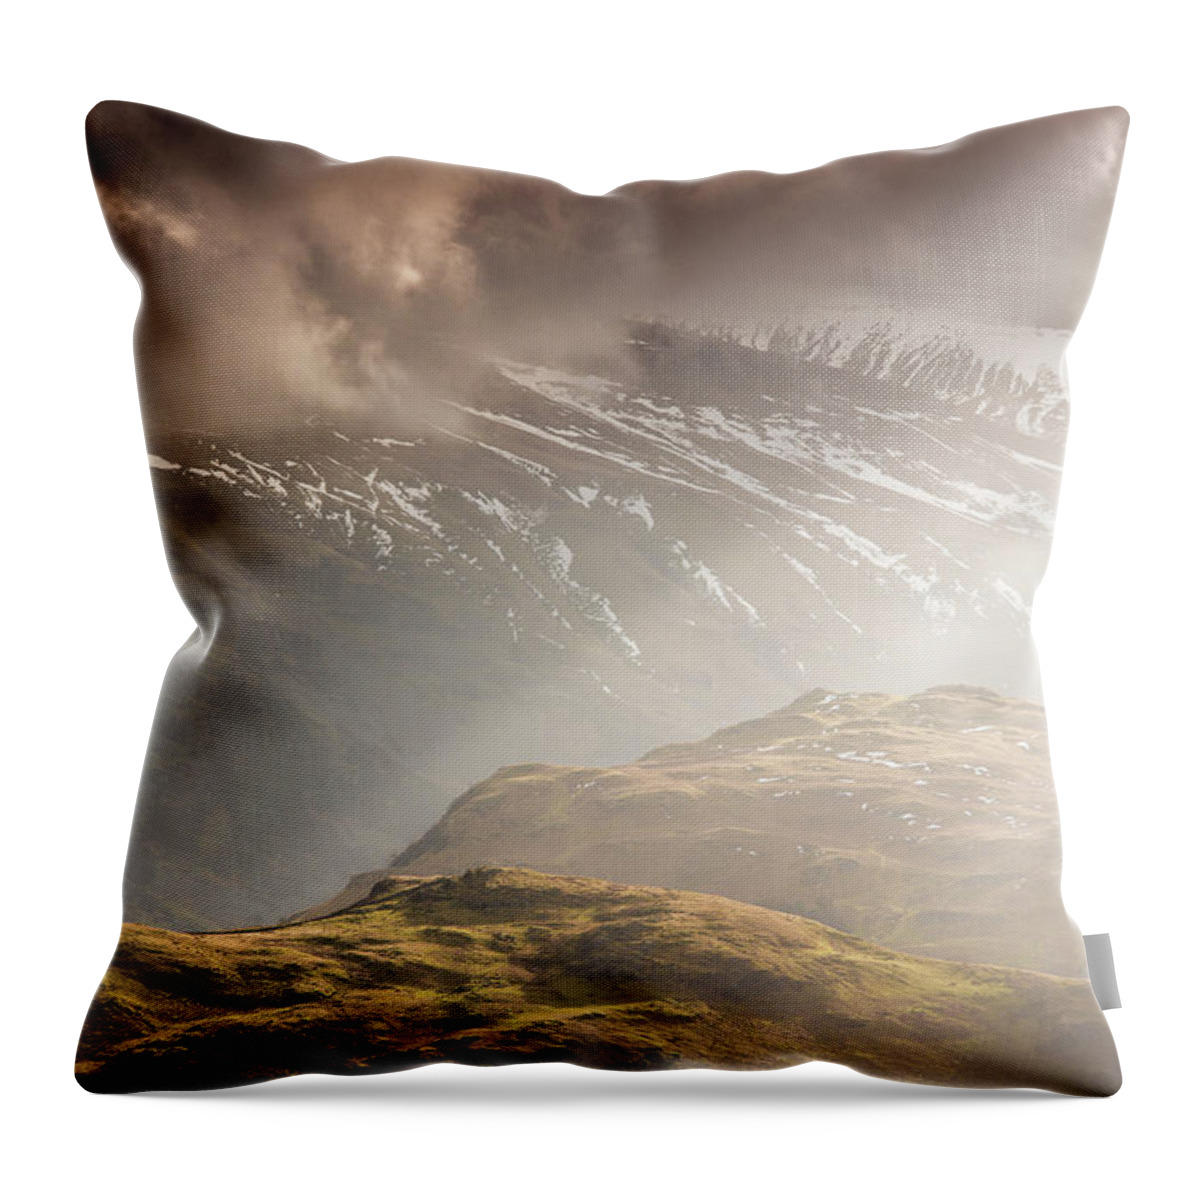 Scenics Throw Pillow featuring the photograph Castlerigg Stone Circle, Lake District by John Finney Photography